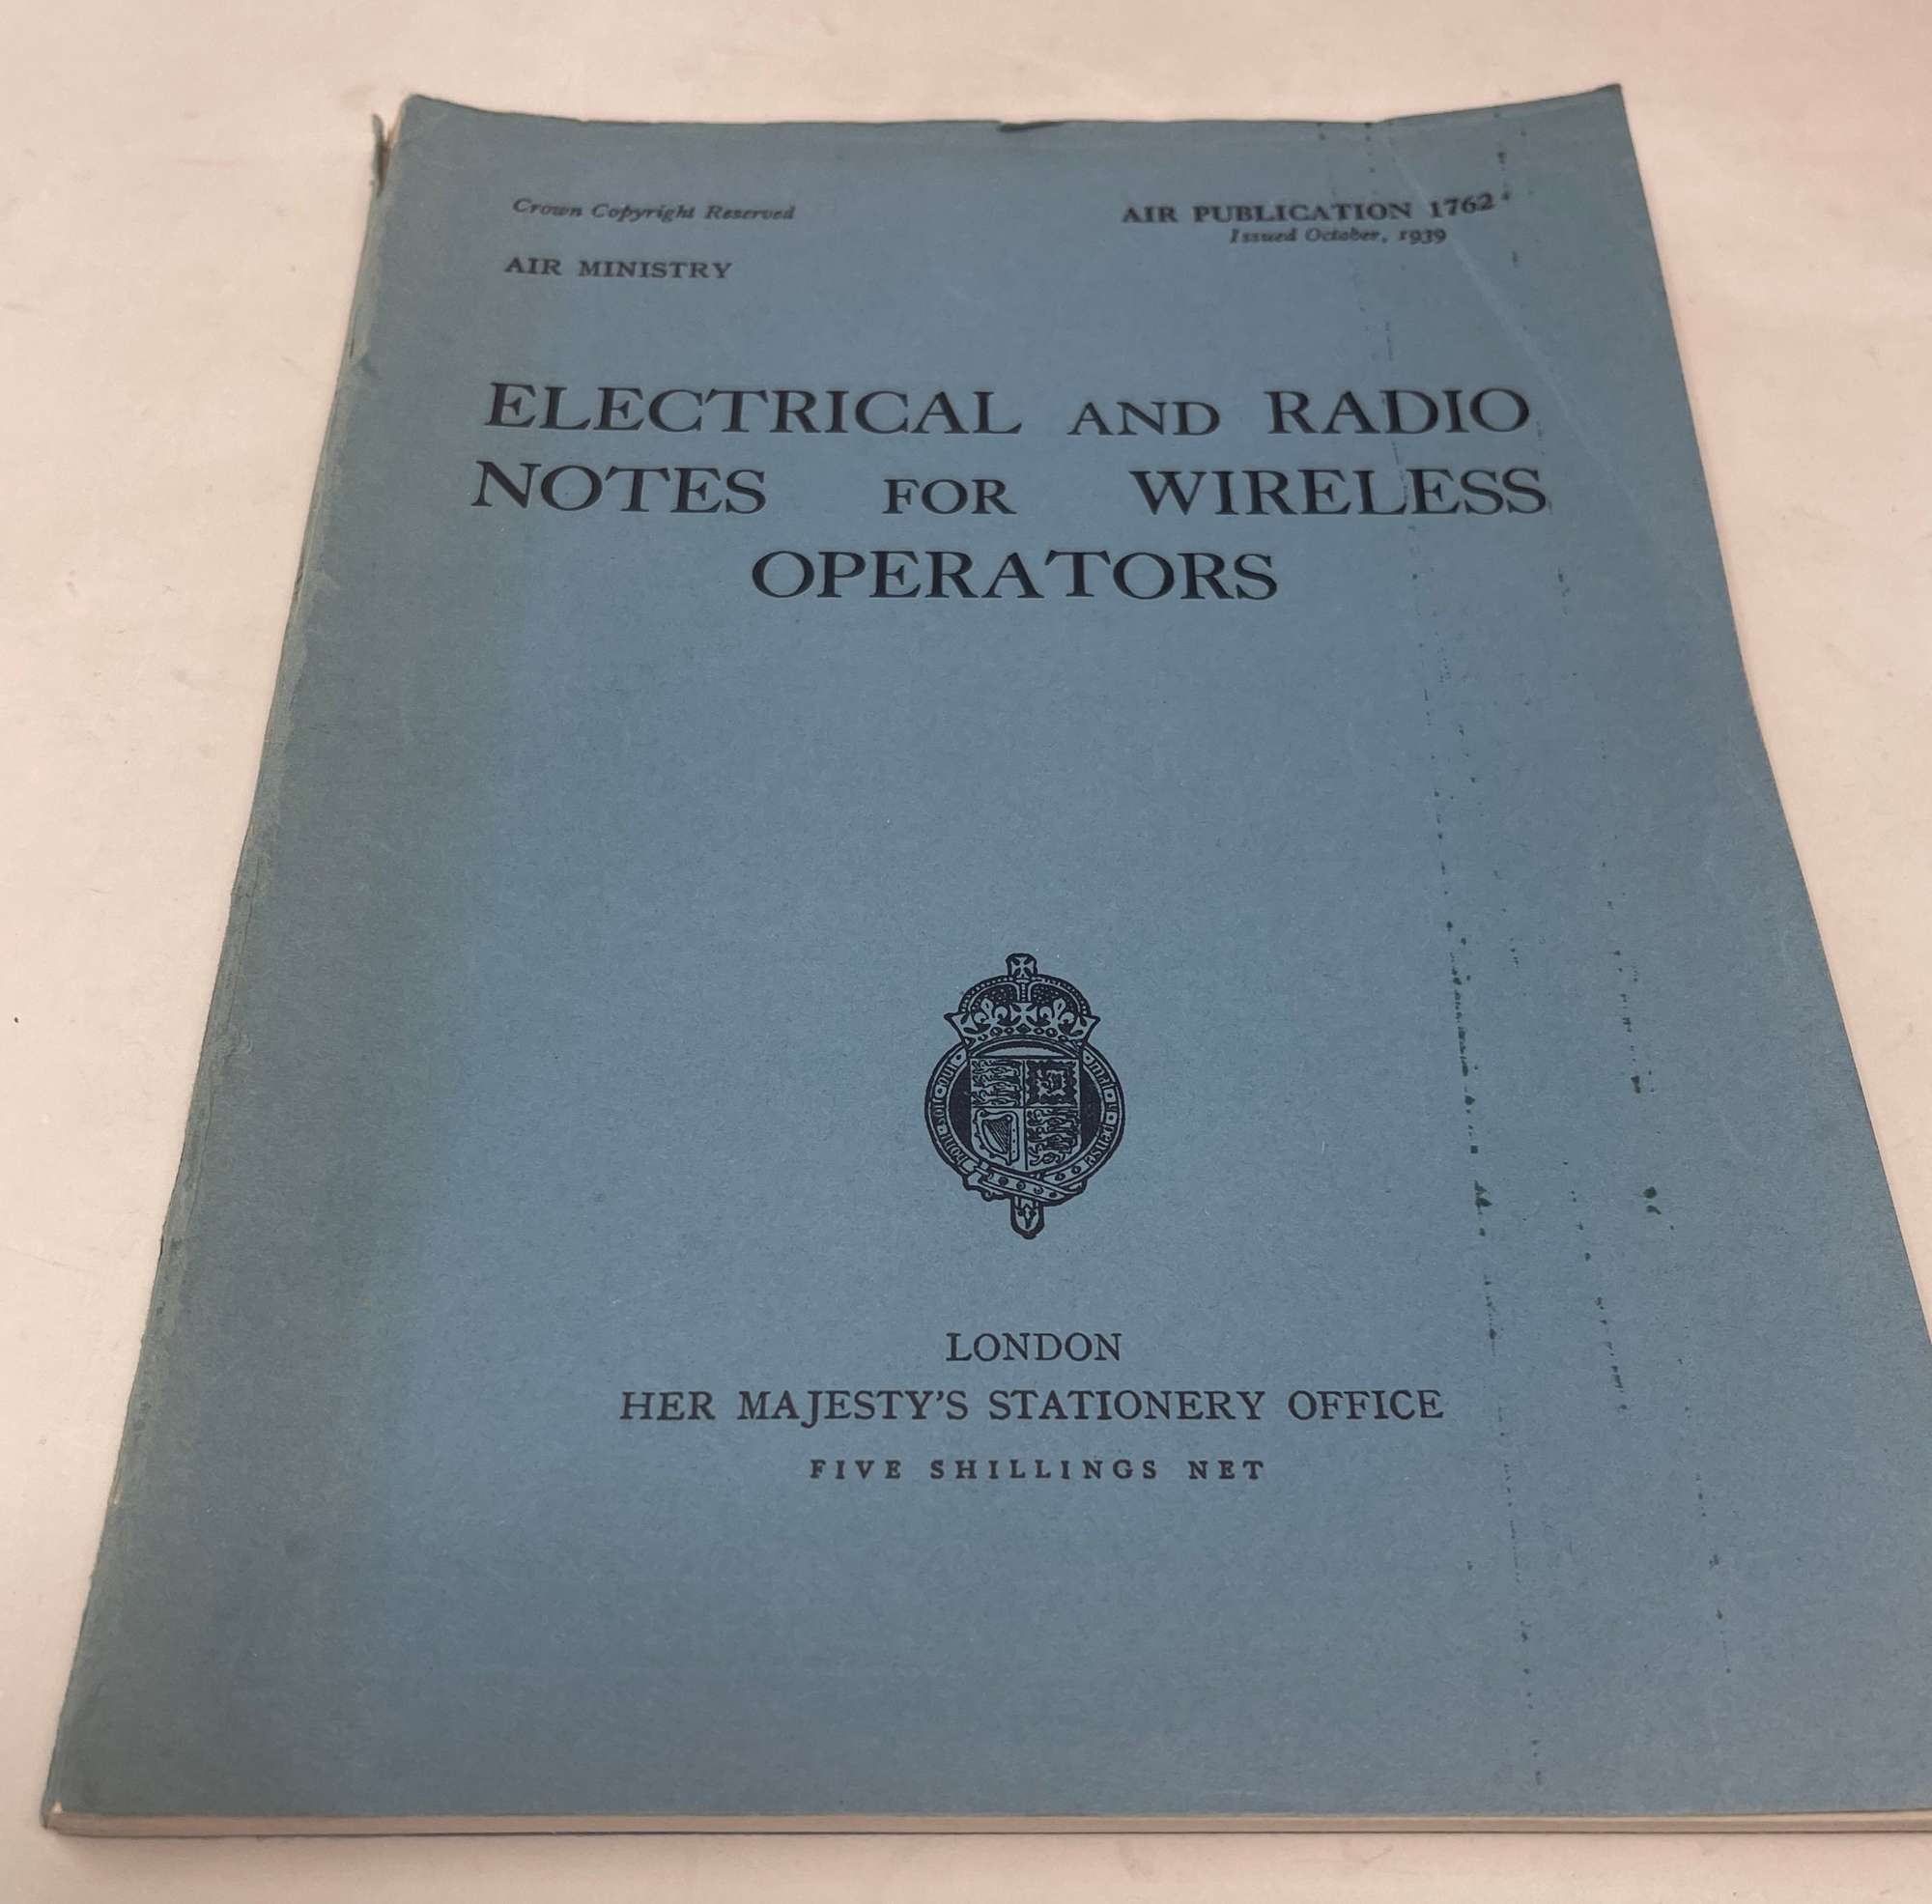 Electrical and Radio Notes For Wireless Operators - Air Publication 1762 - HMSO